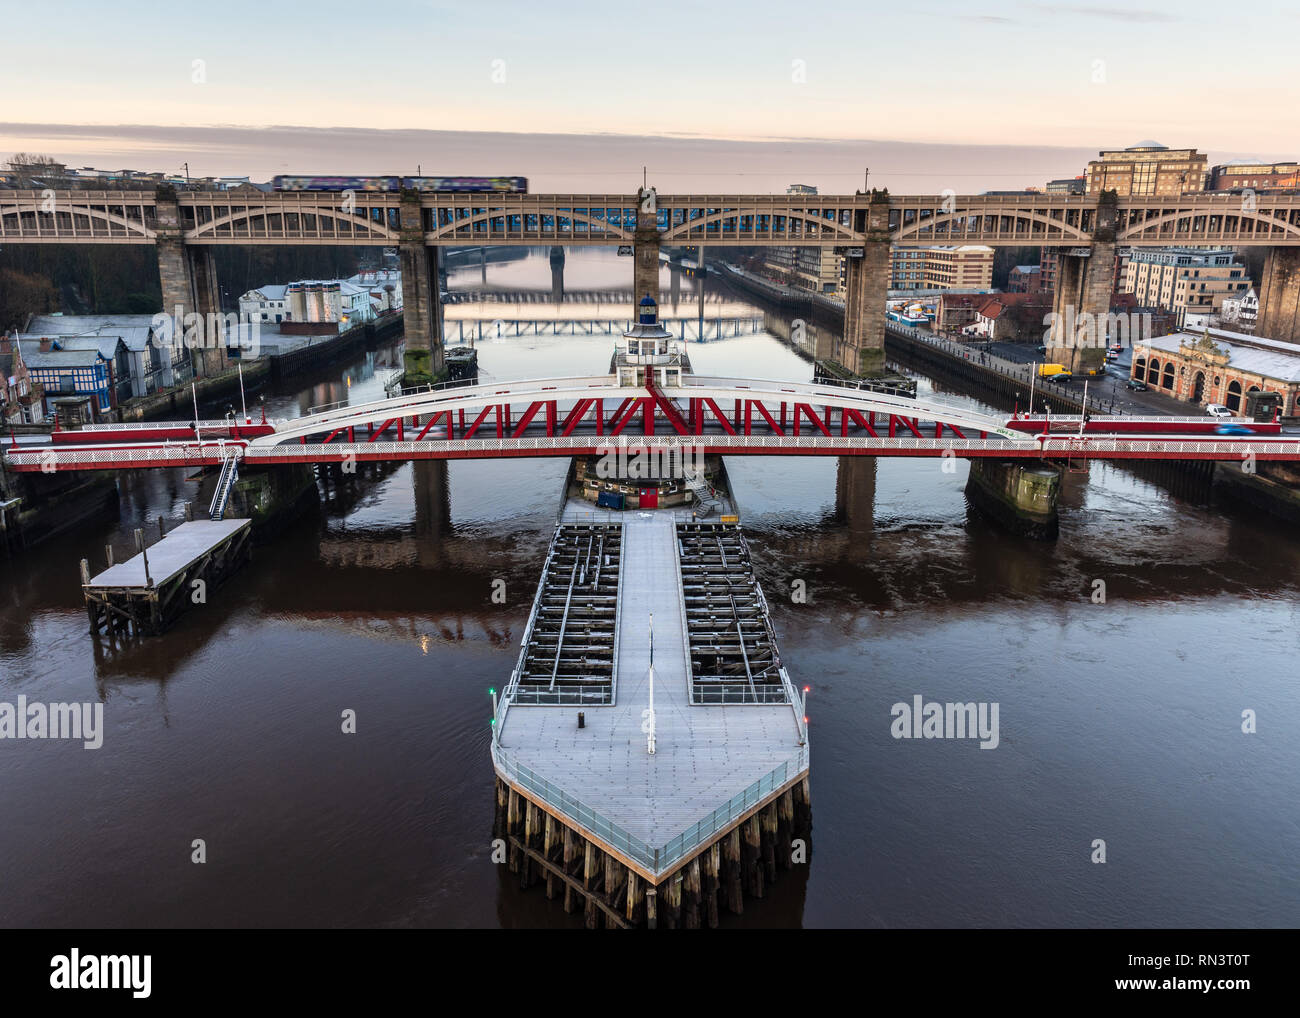 Newcastle, England, UK - February 5, 2019: A Northern rail diesel commuter train crosses the River Tyne between Newcastle and Gateshead on the High Le Stock Photo